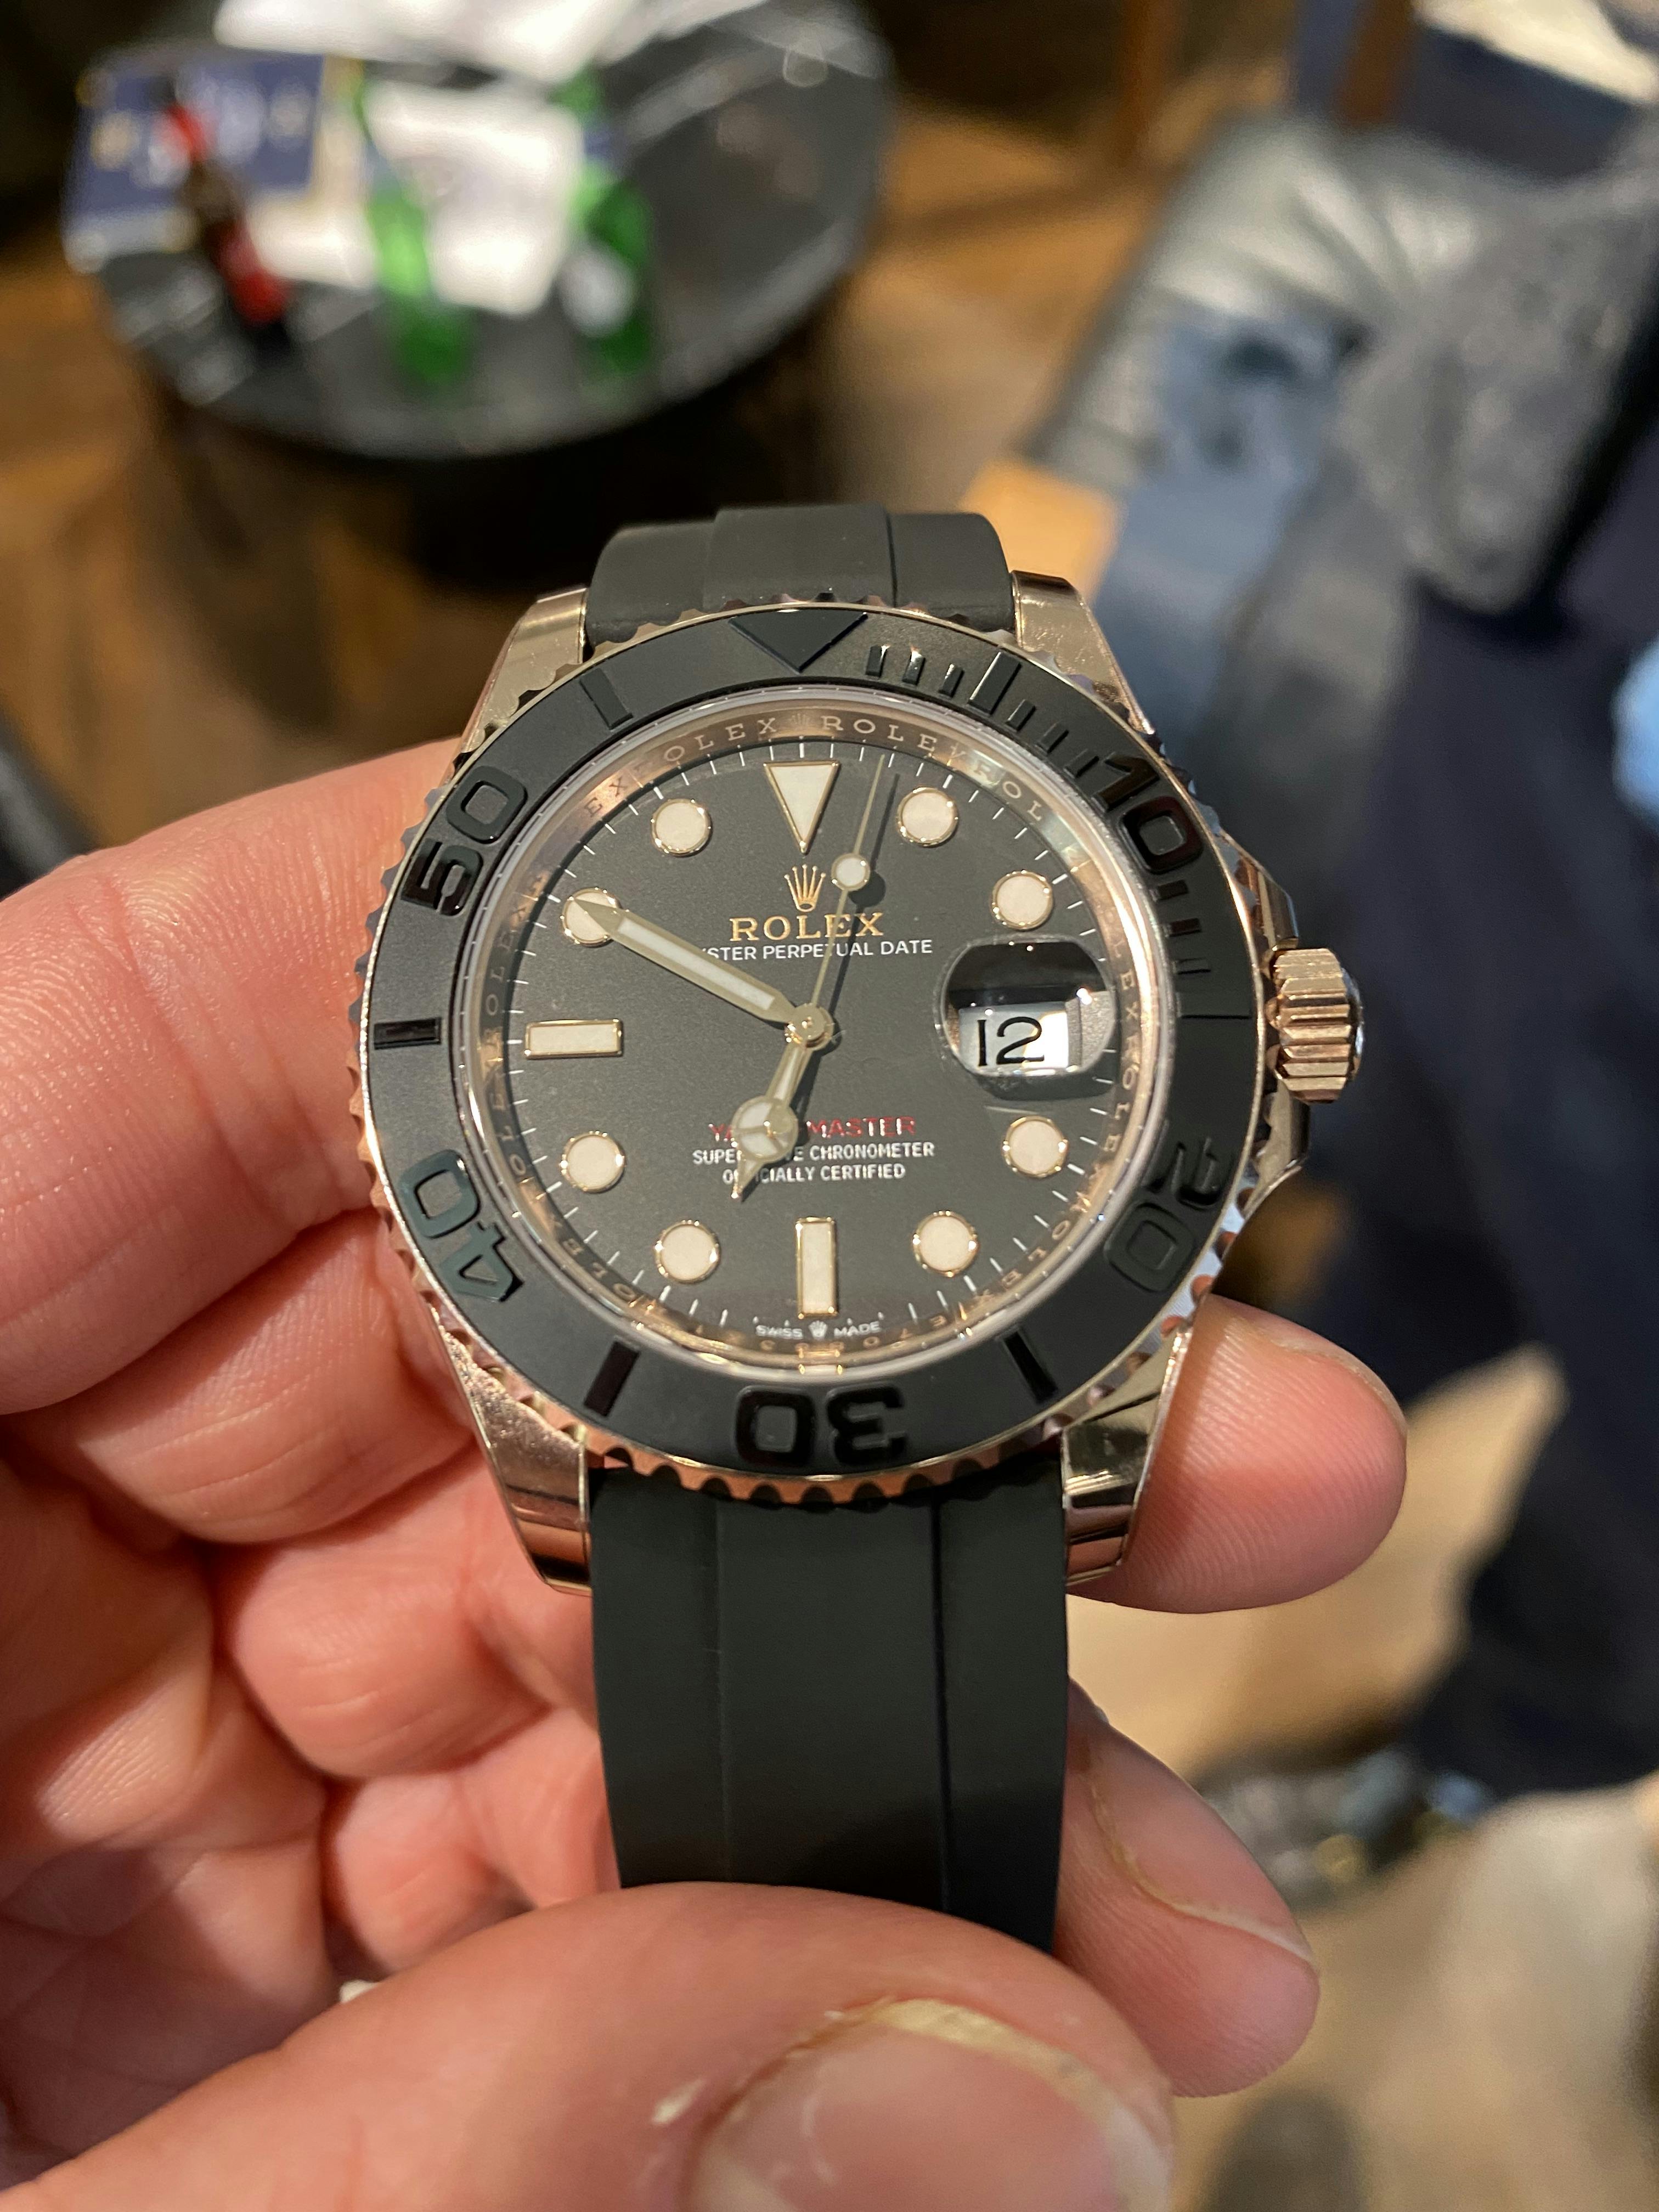 This Rolex Yachtmaster looks amazing with a rubber strap